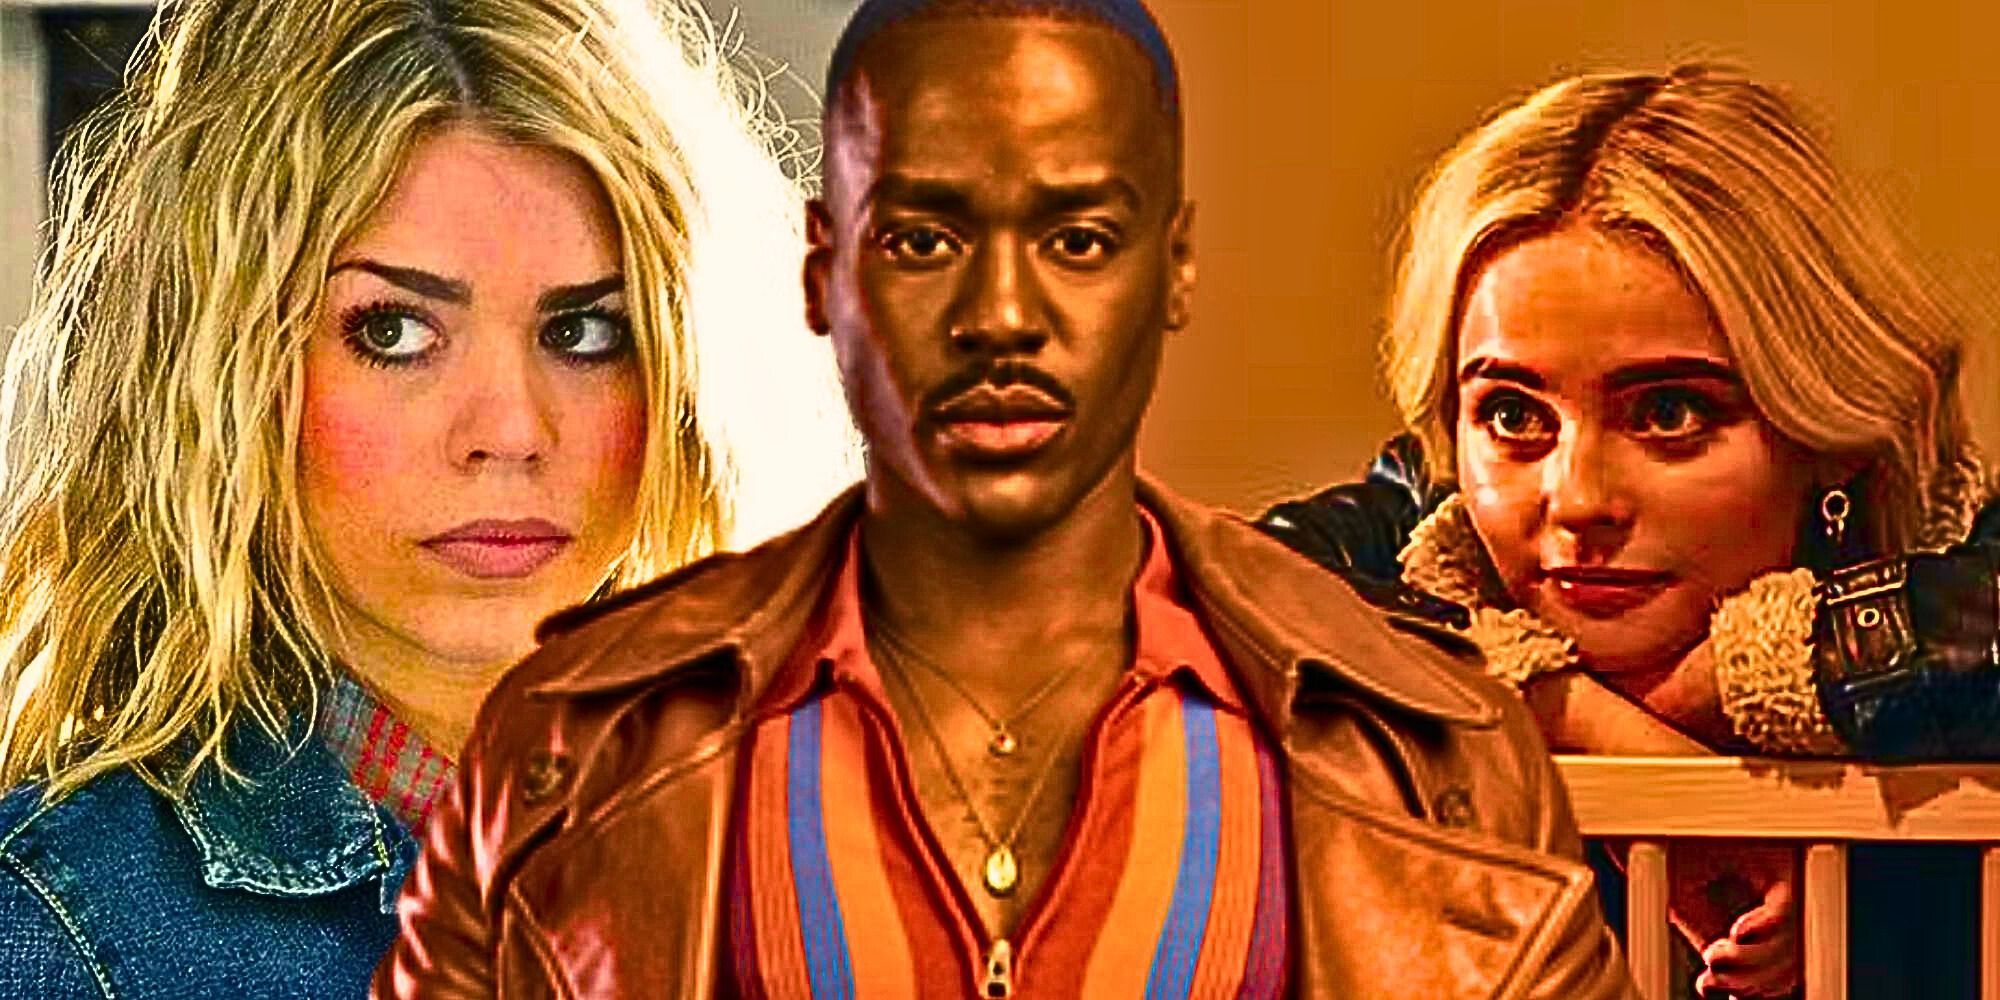 Billie Piper as Rose Tyler, Ncuti Gatwa as the Fifteenth Doctor, and Millie Gibson as Ruby Sunday.